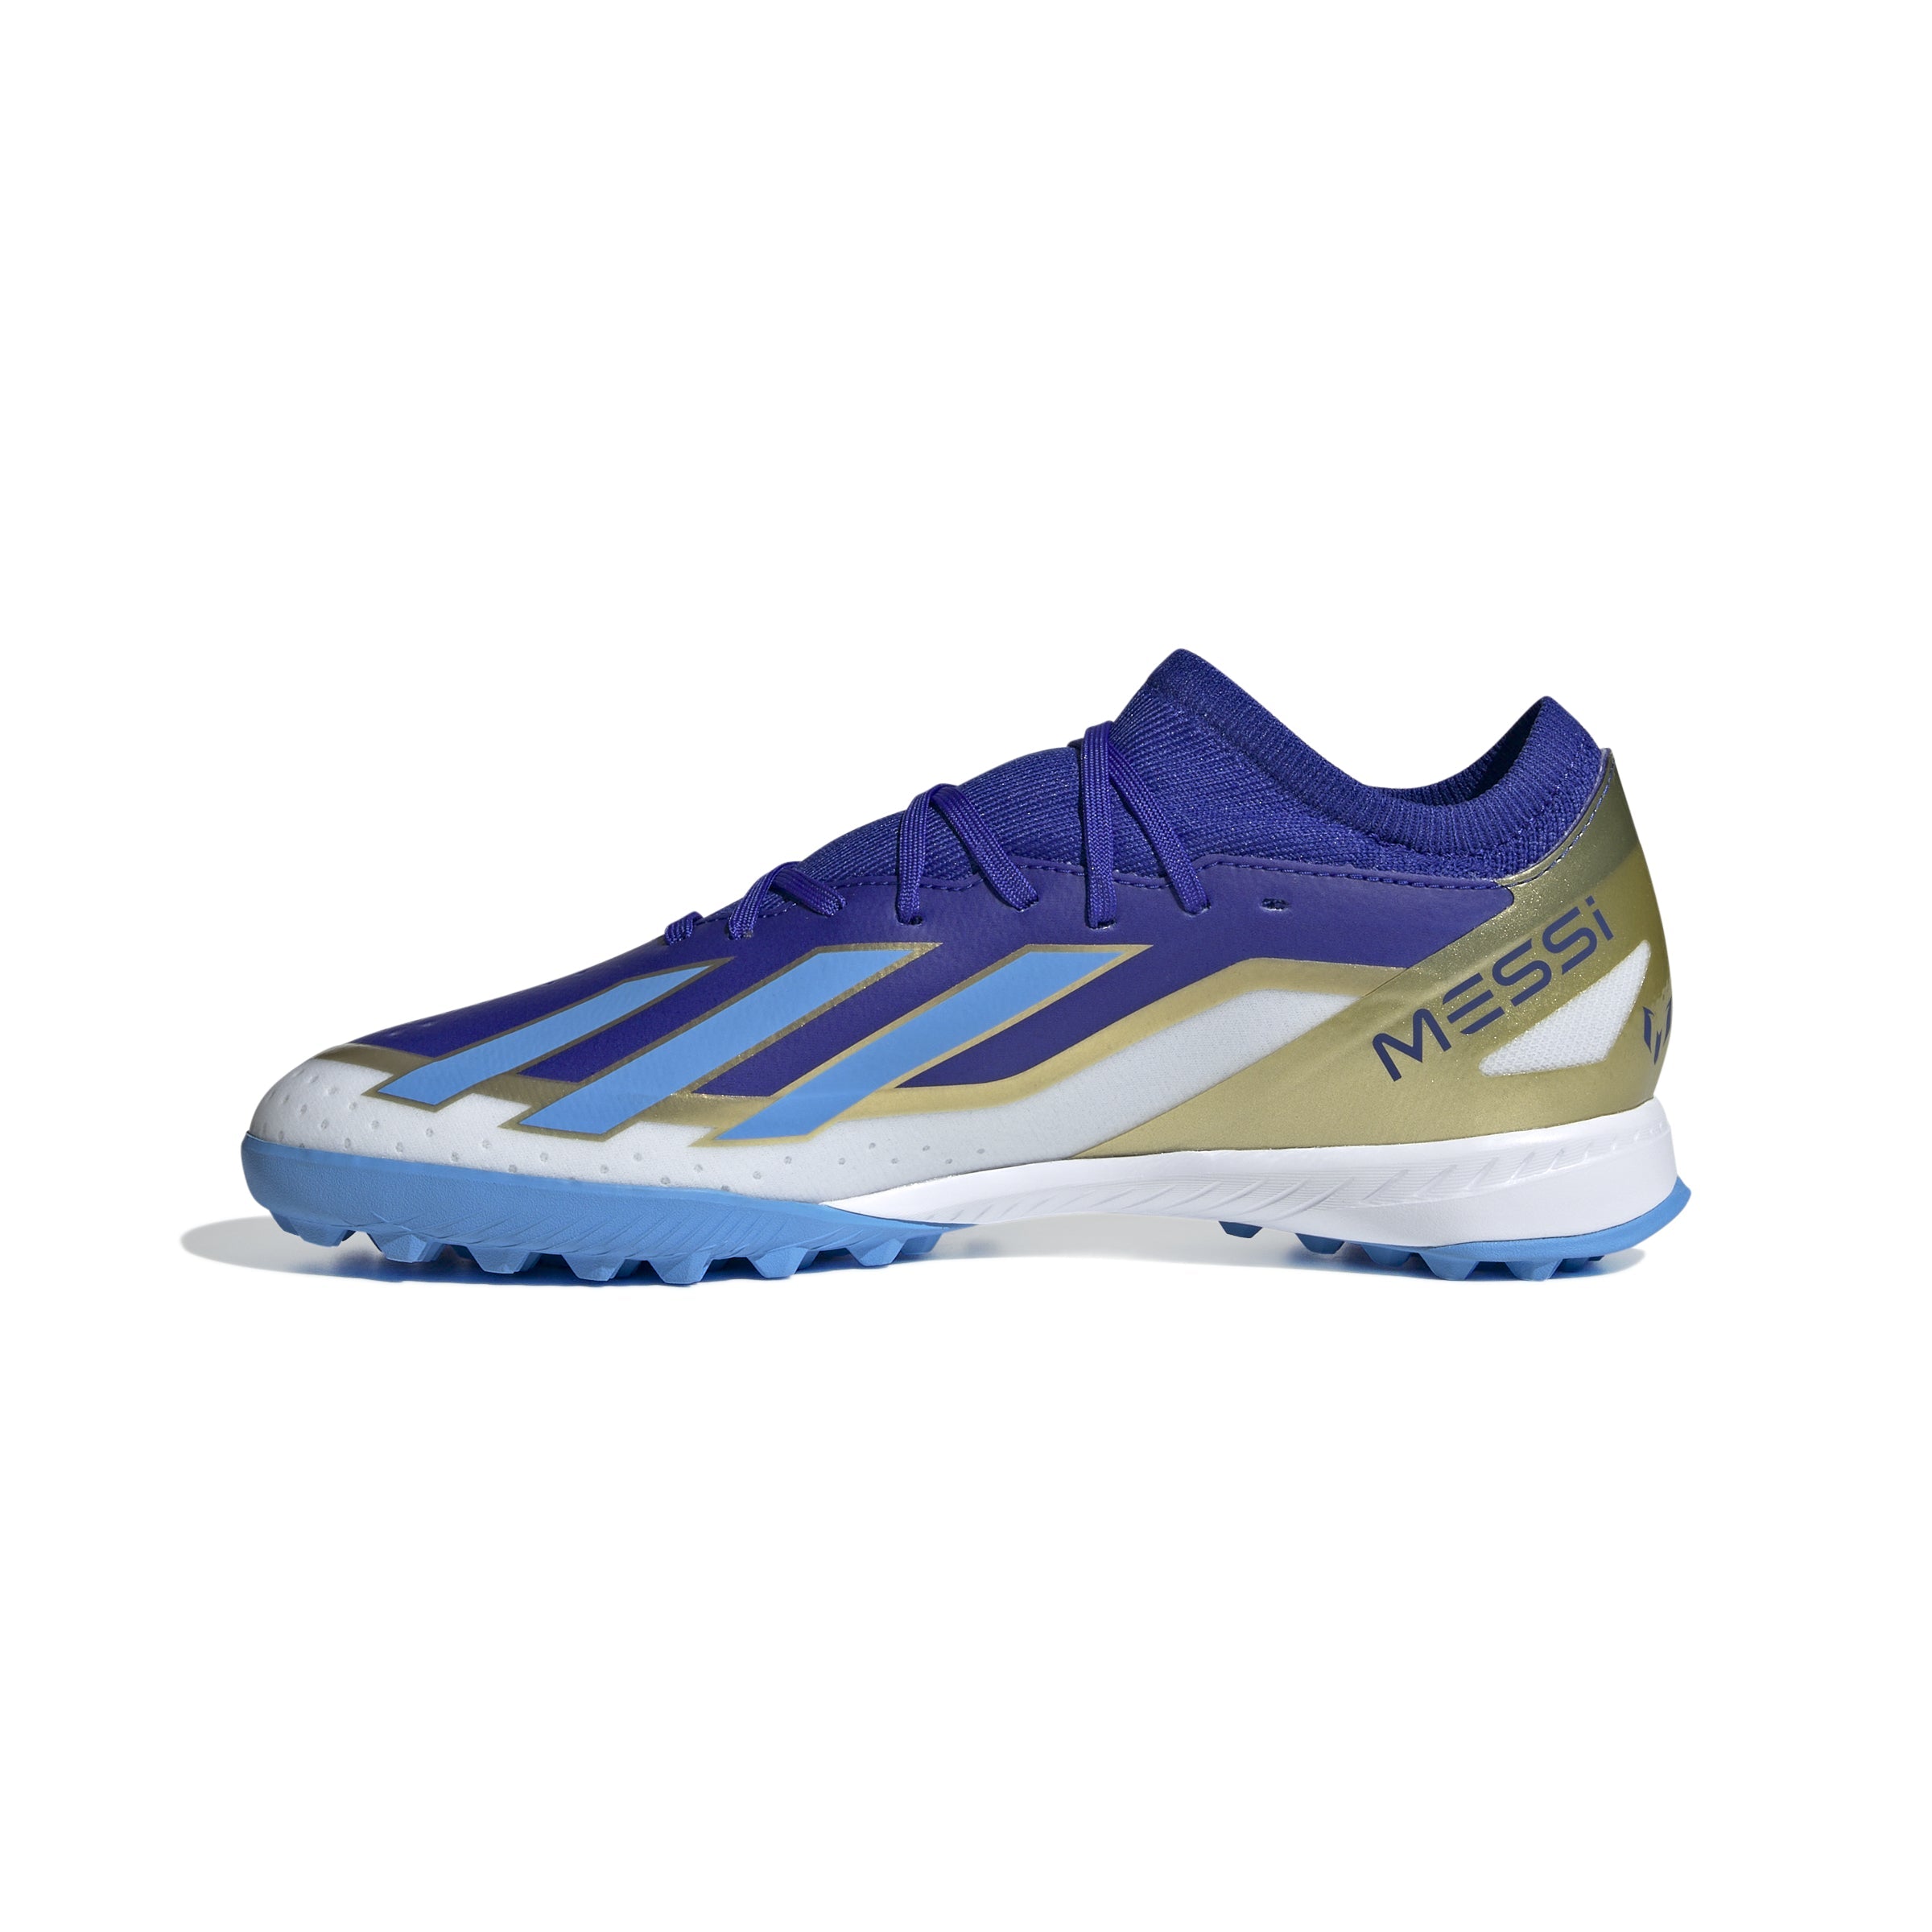 adidas Crazyfast League TF Messi Turf Shoes